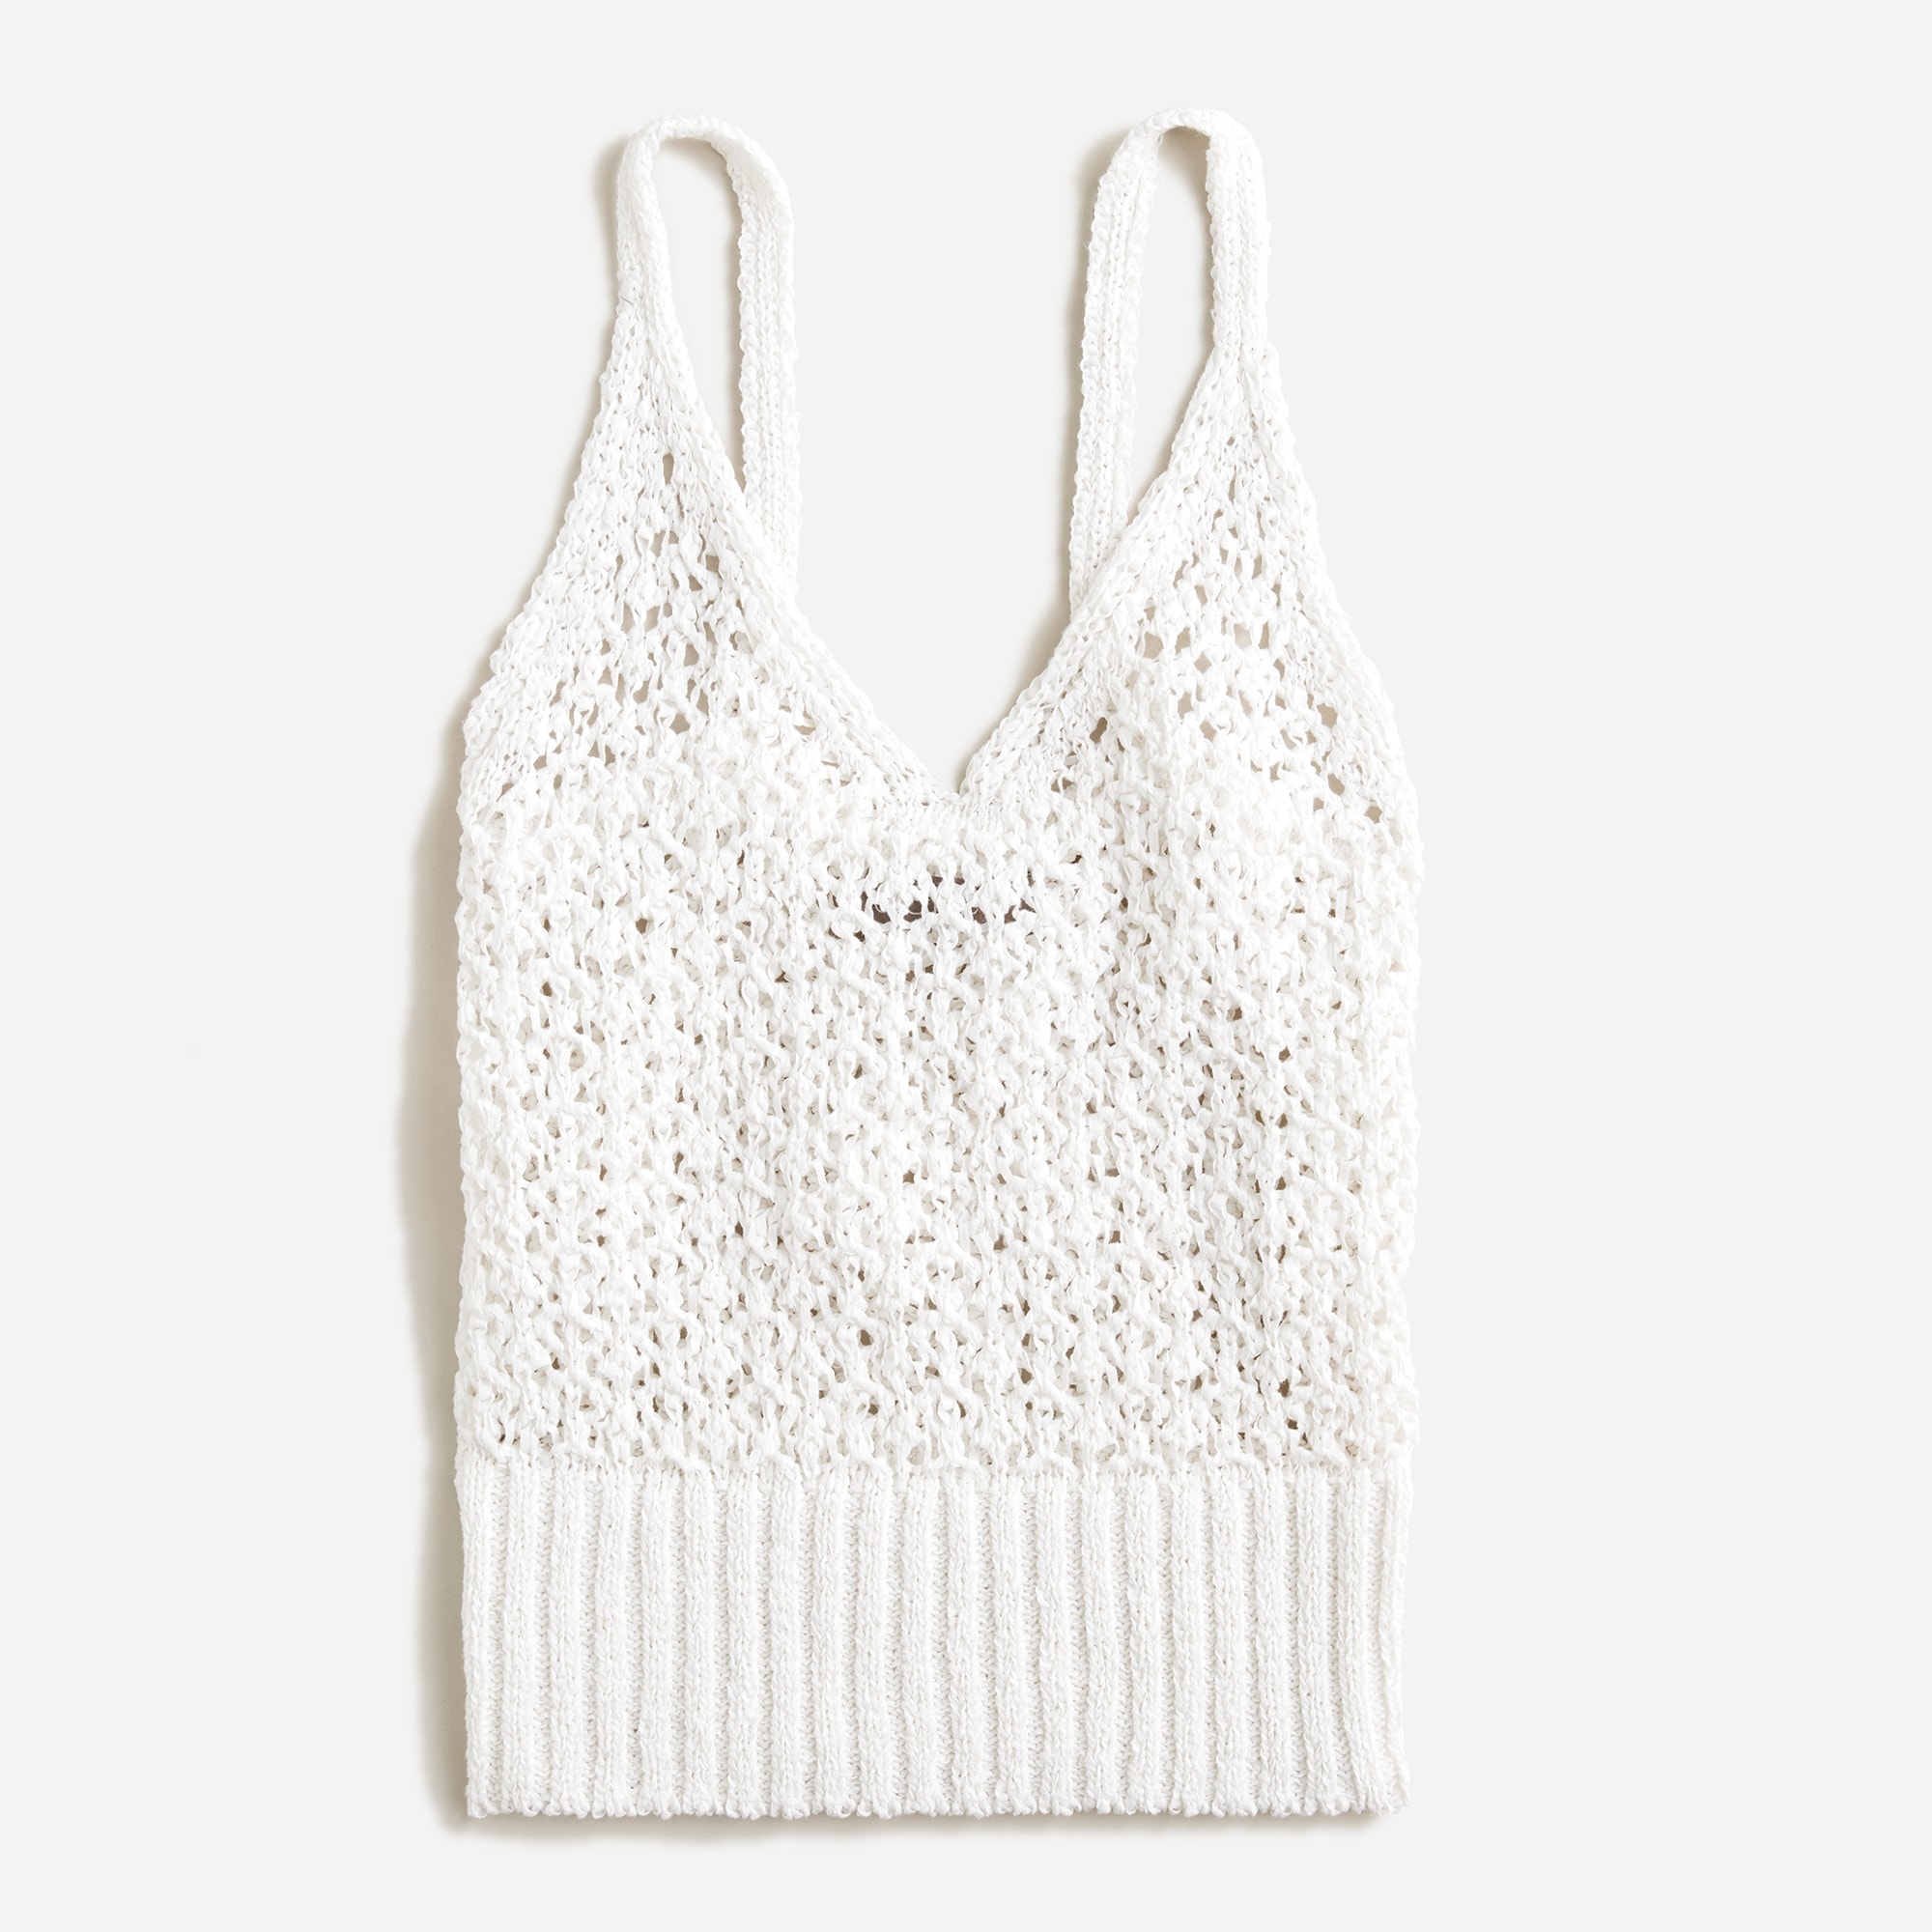  Cropped V-neck sweater-tank in textured pointelle